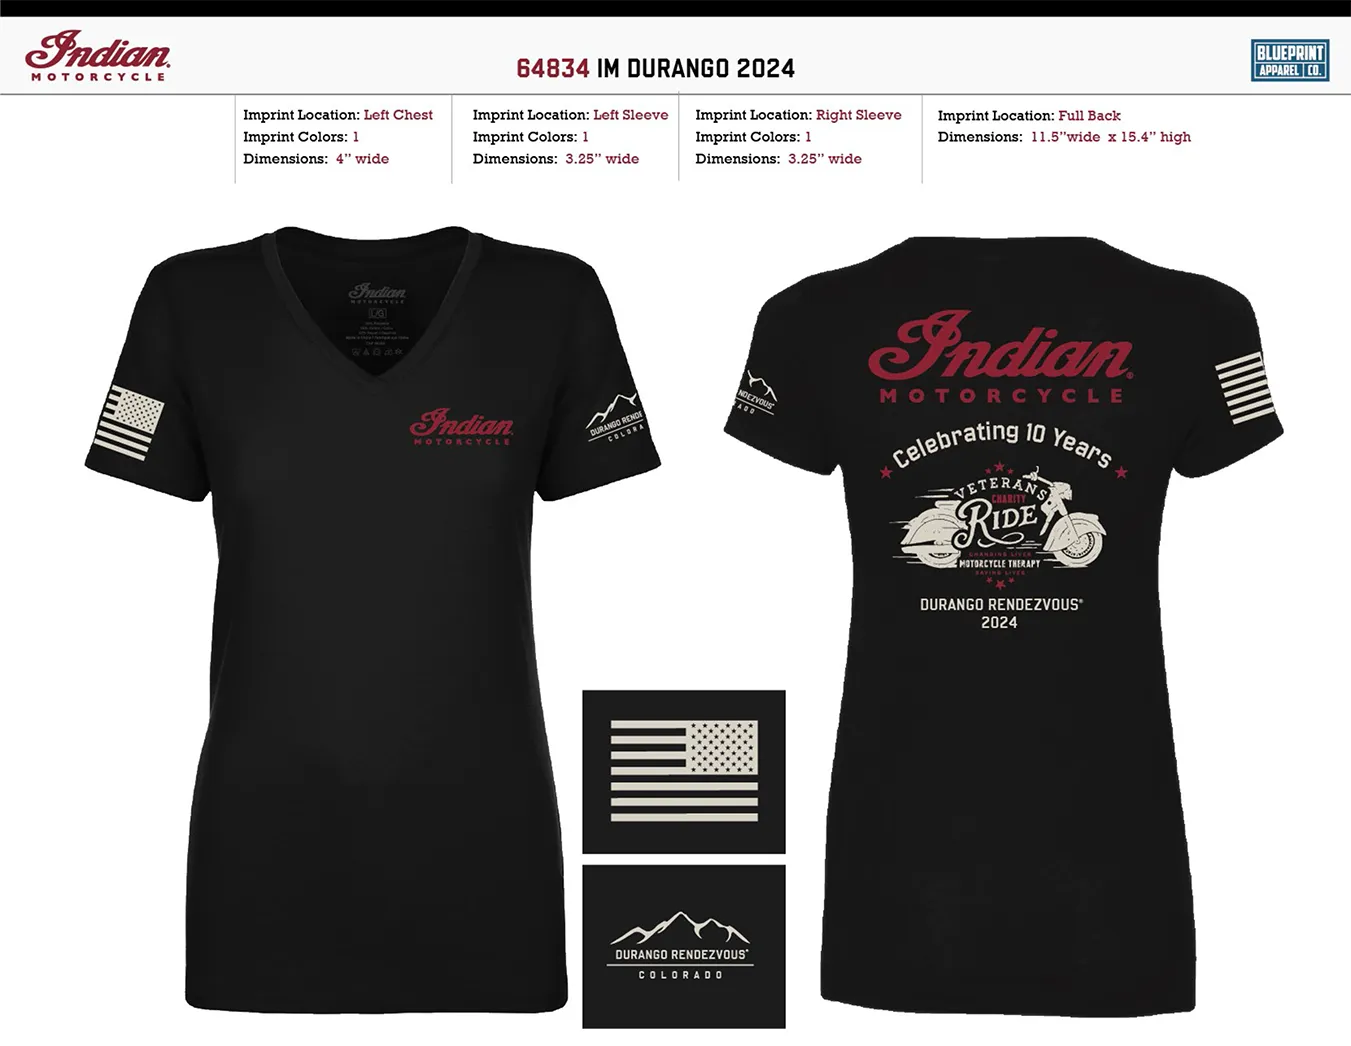 Indian Motorcycle Durango Event Shirt - Women's (Black only)